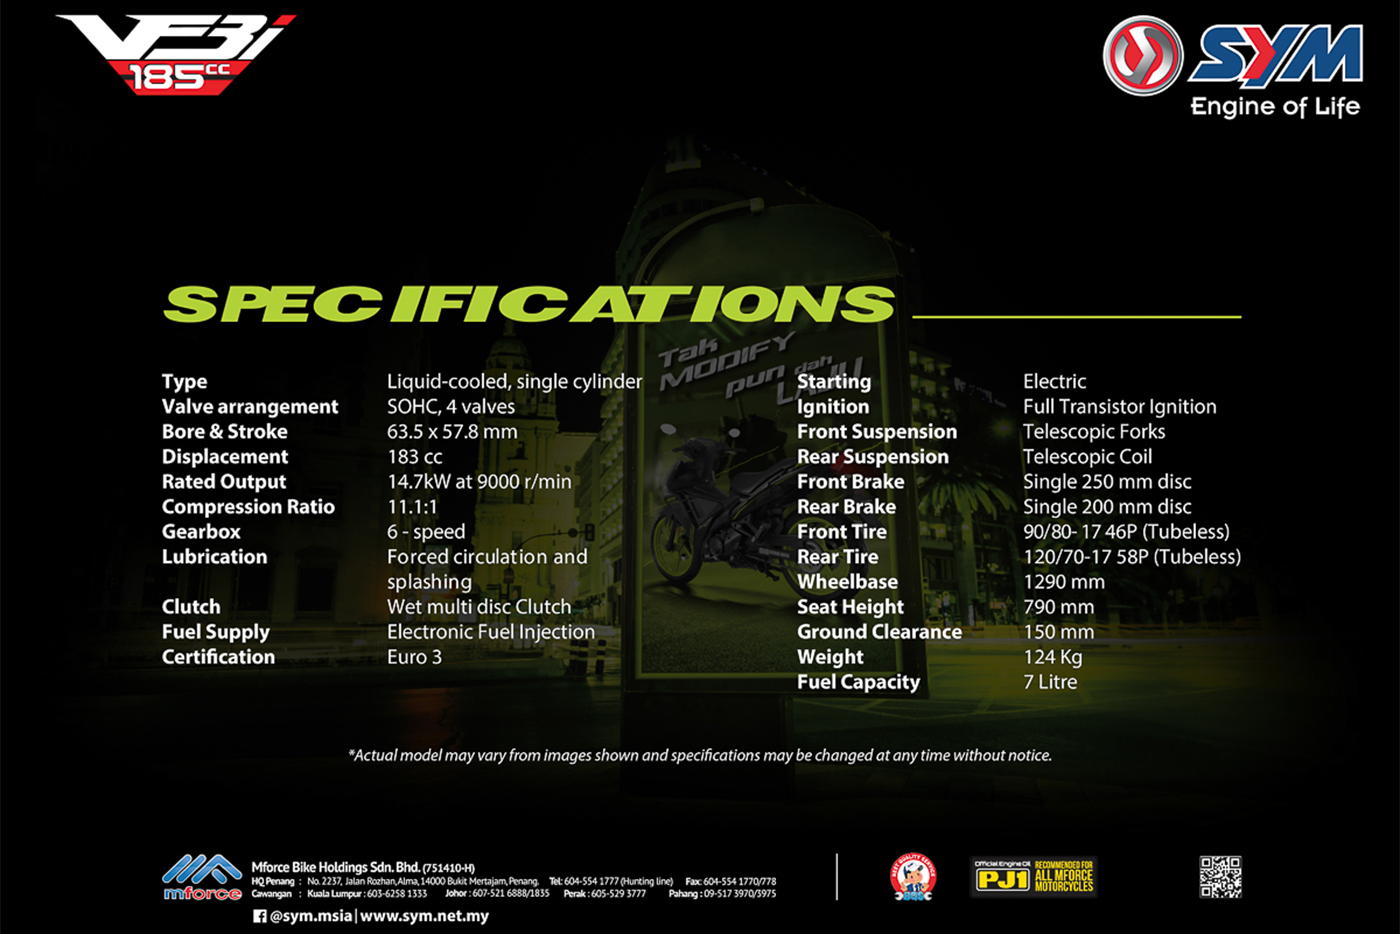 2020-sym-vf3i-limited-edition-le-launch-price-malaysia-185cc-super-moped-10.jpg